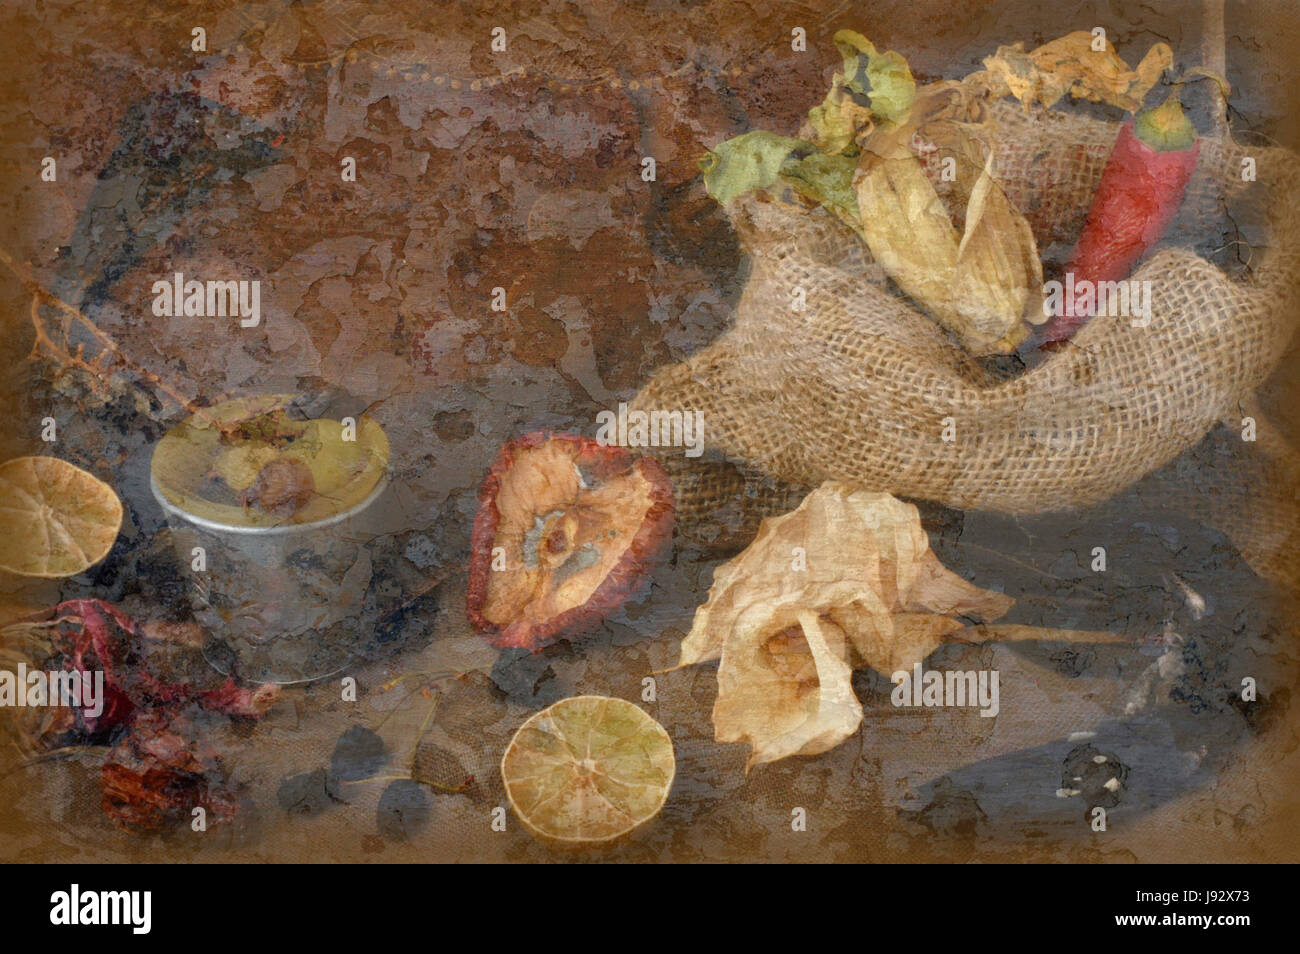 death, painting, vintage, progenies, fruits, dry, dried up, barren, decayed, Stock Photo